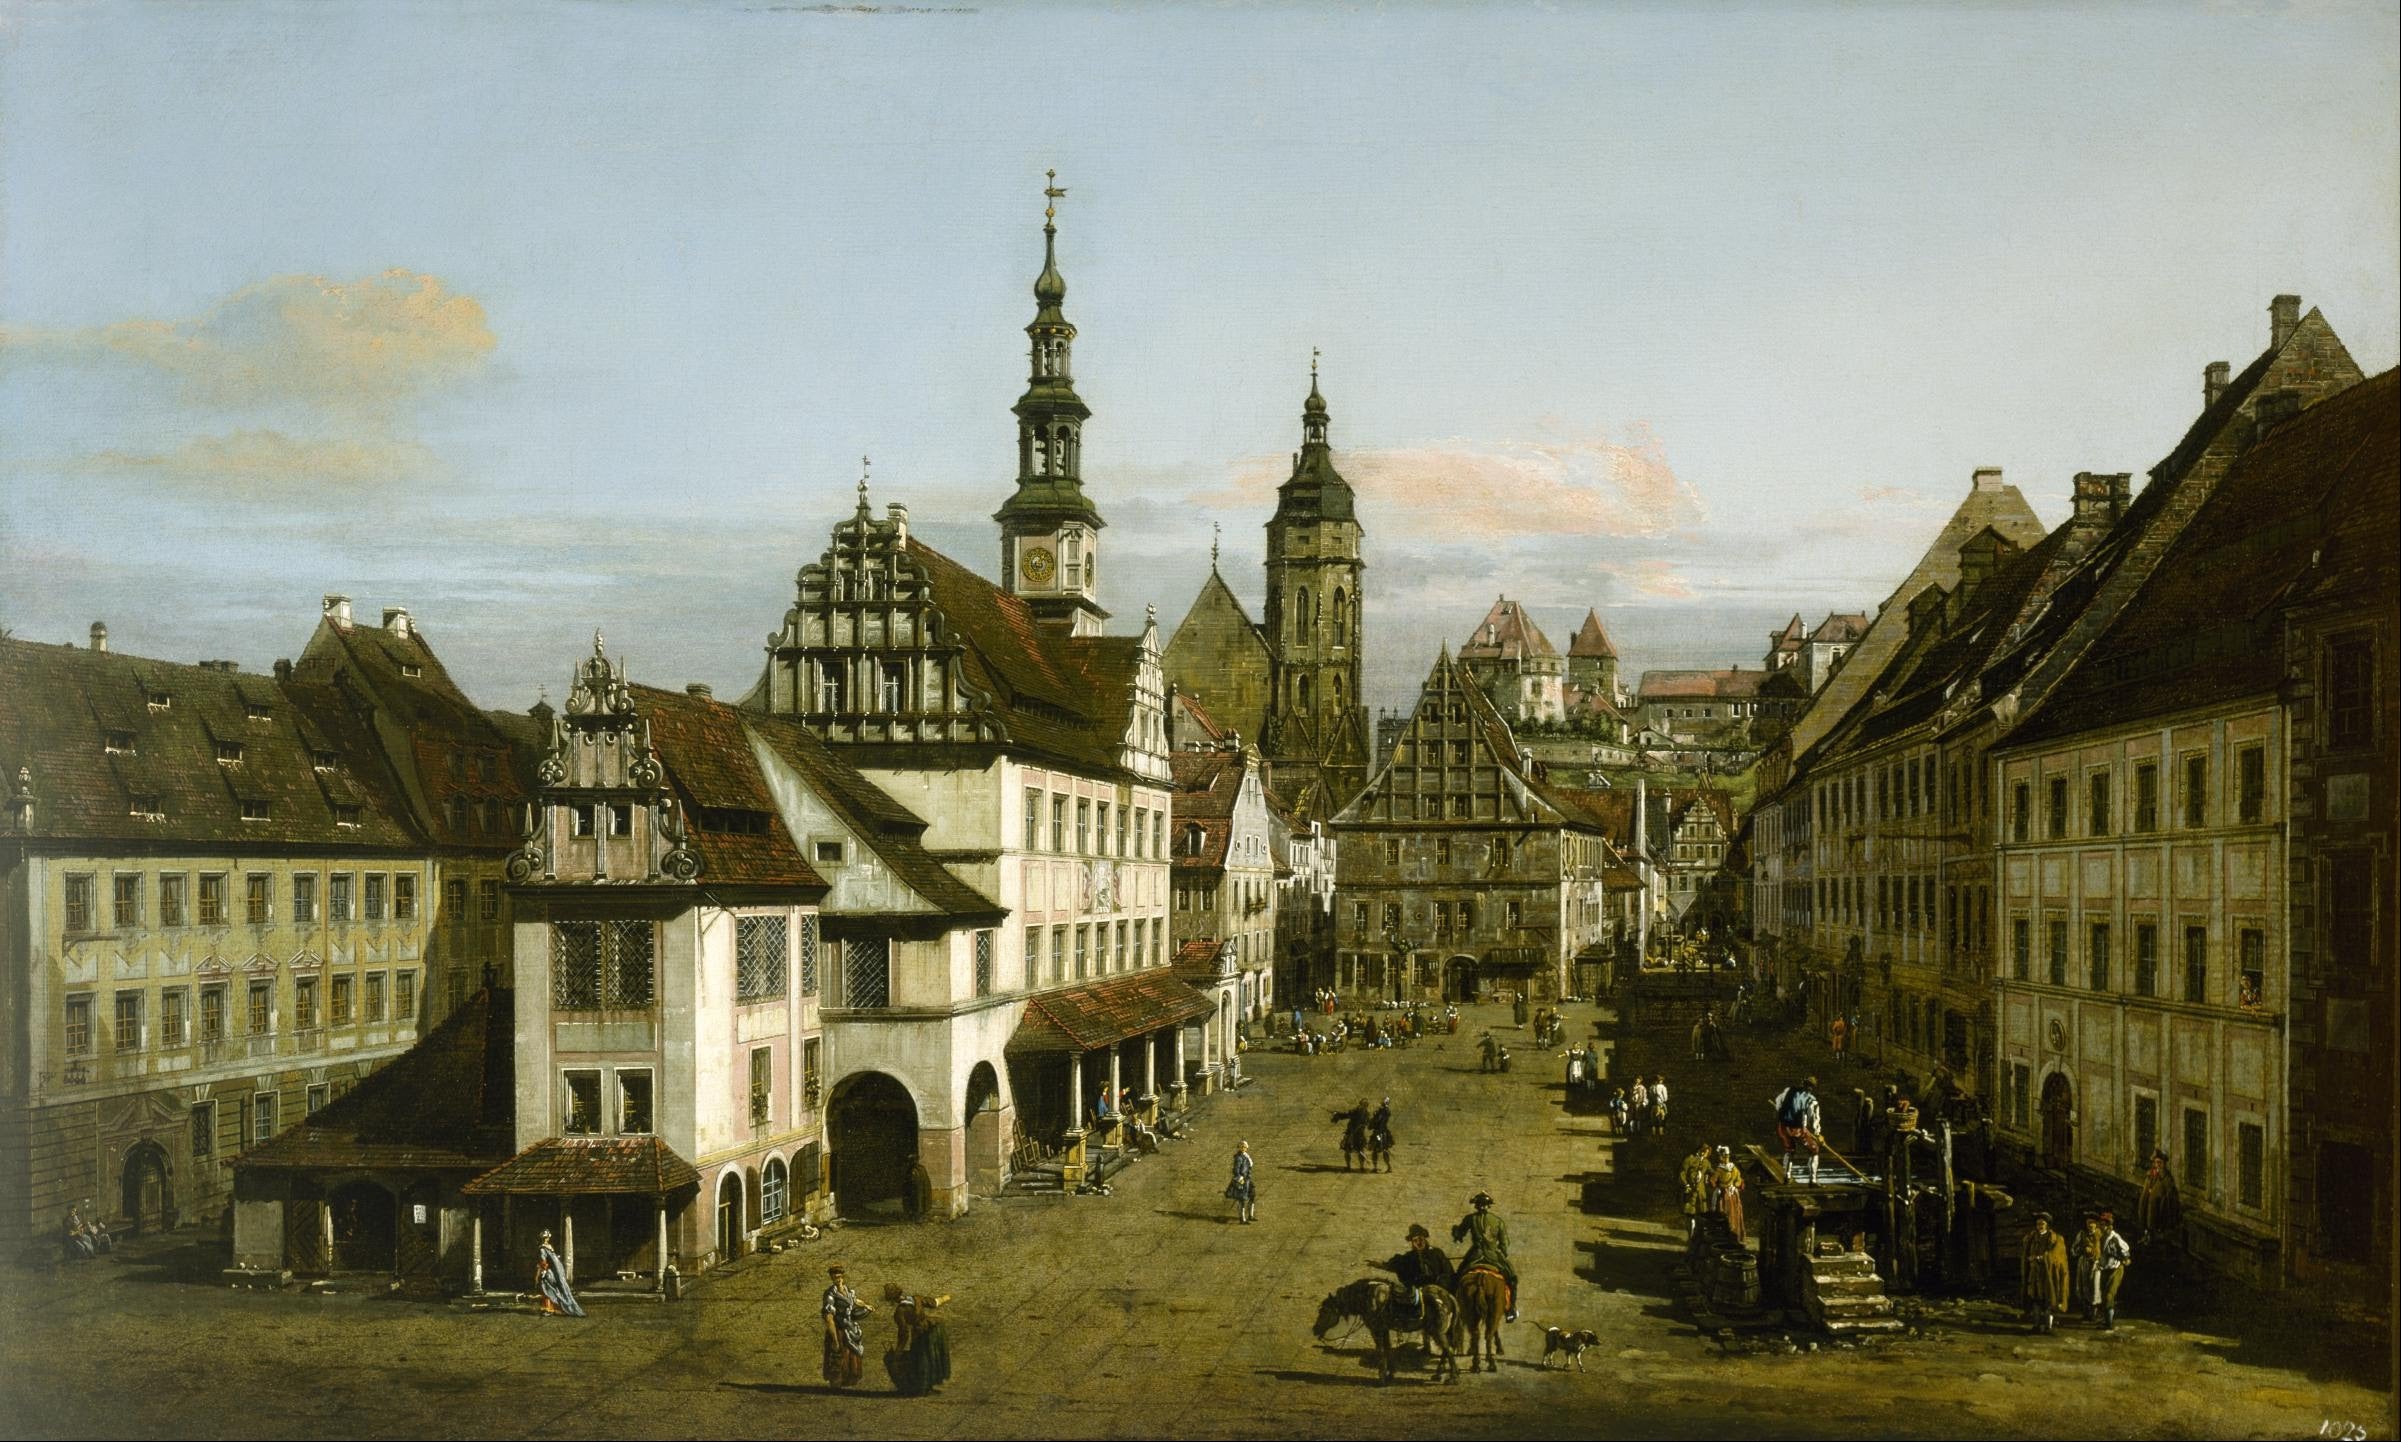 ‘The Marketplace at Pirna’ by Bernardo Bellotto was mistakenly sent to the Netherlands